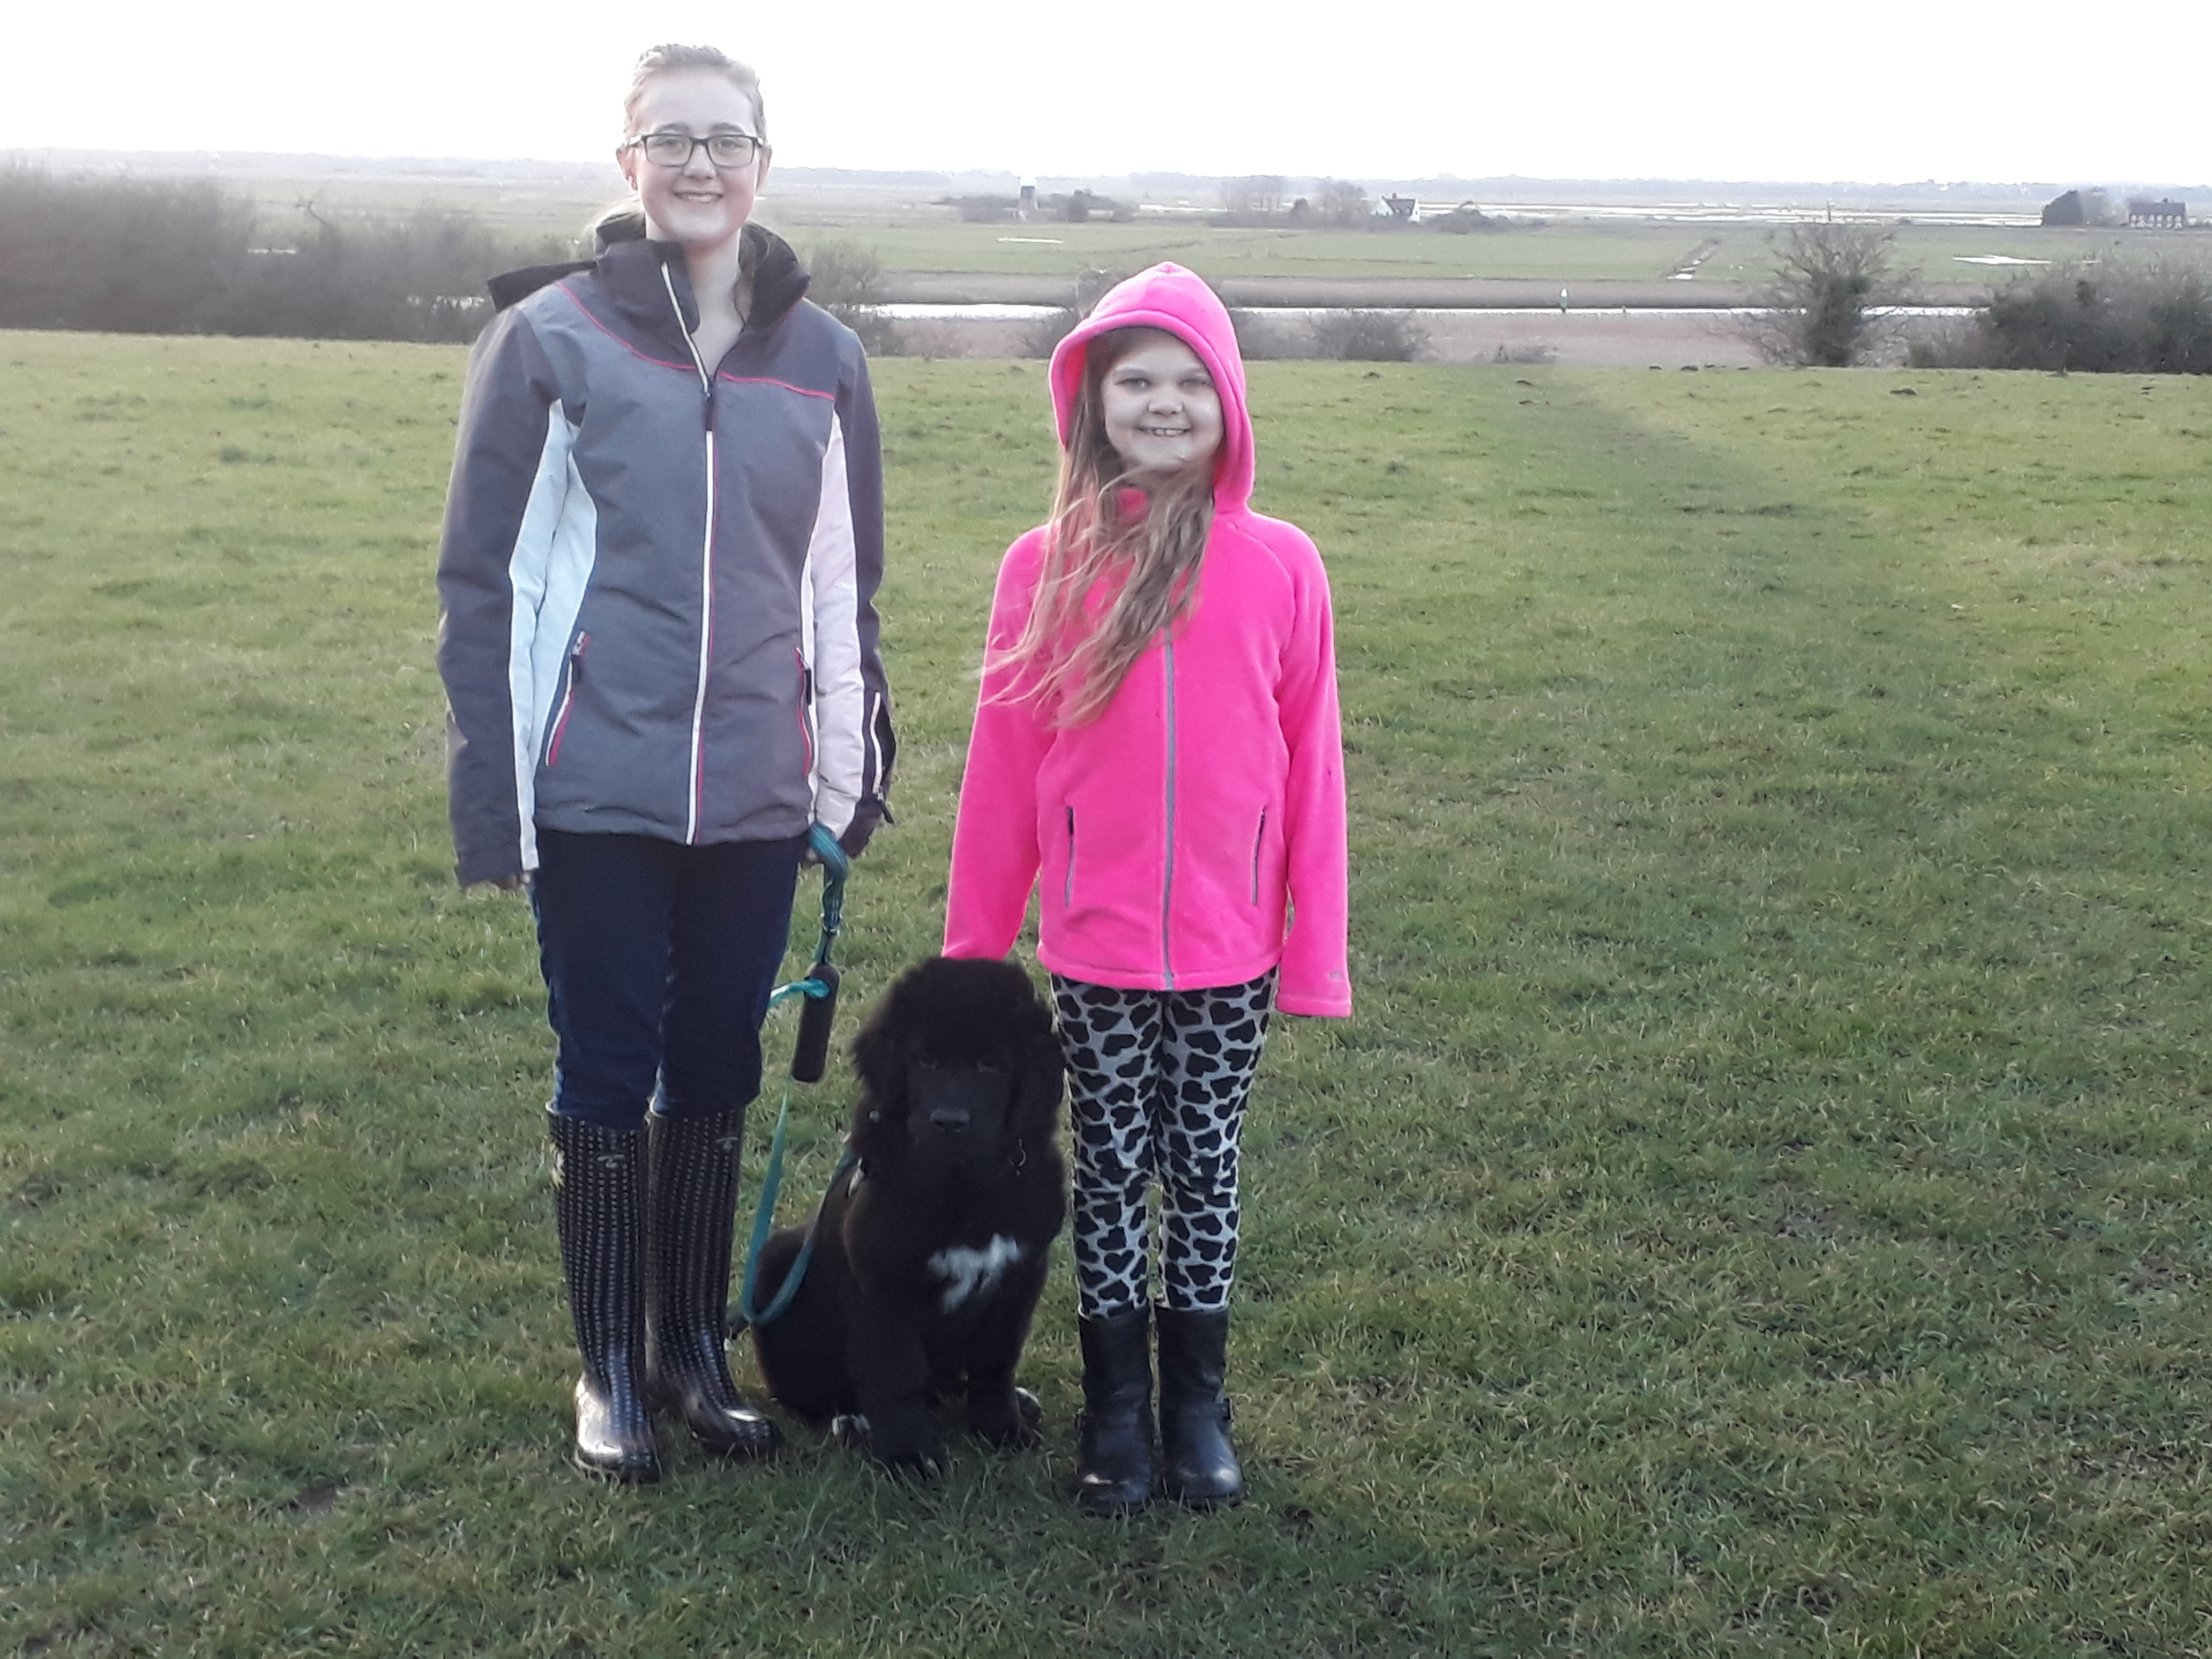 Find the fun outdoors - Neva and Eowyn walking Merrie the puppy